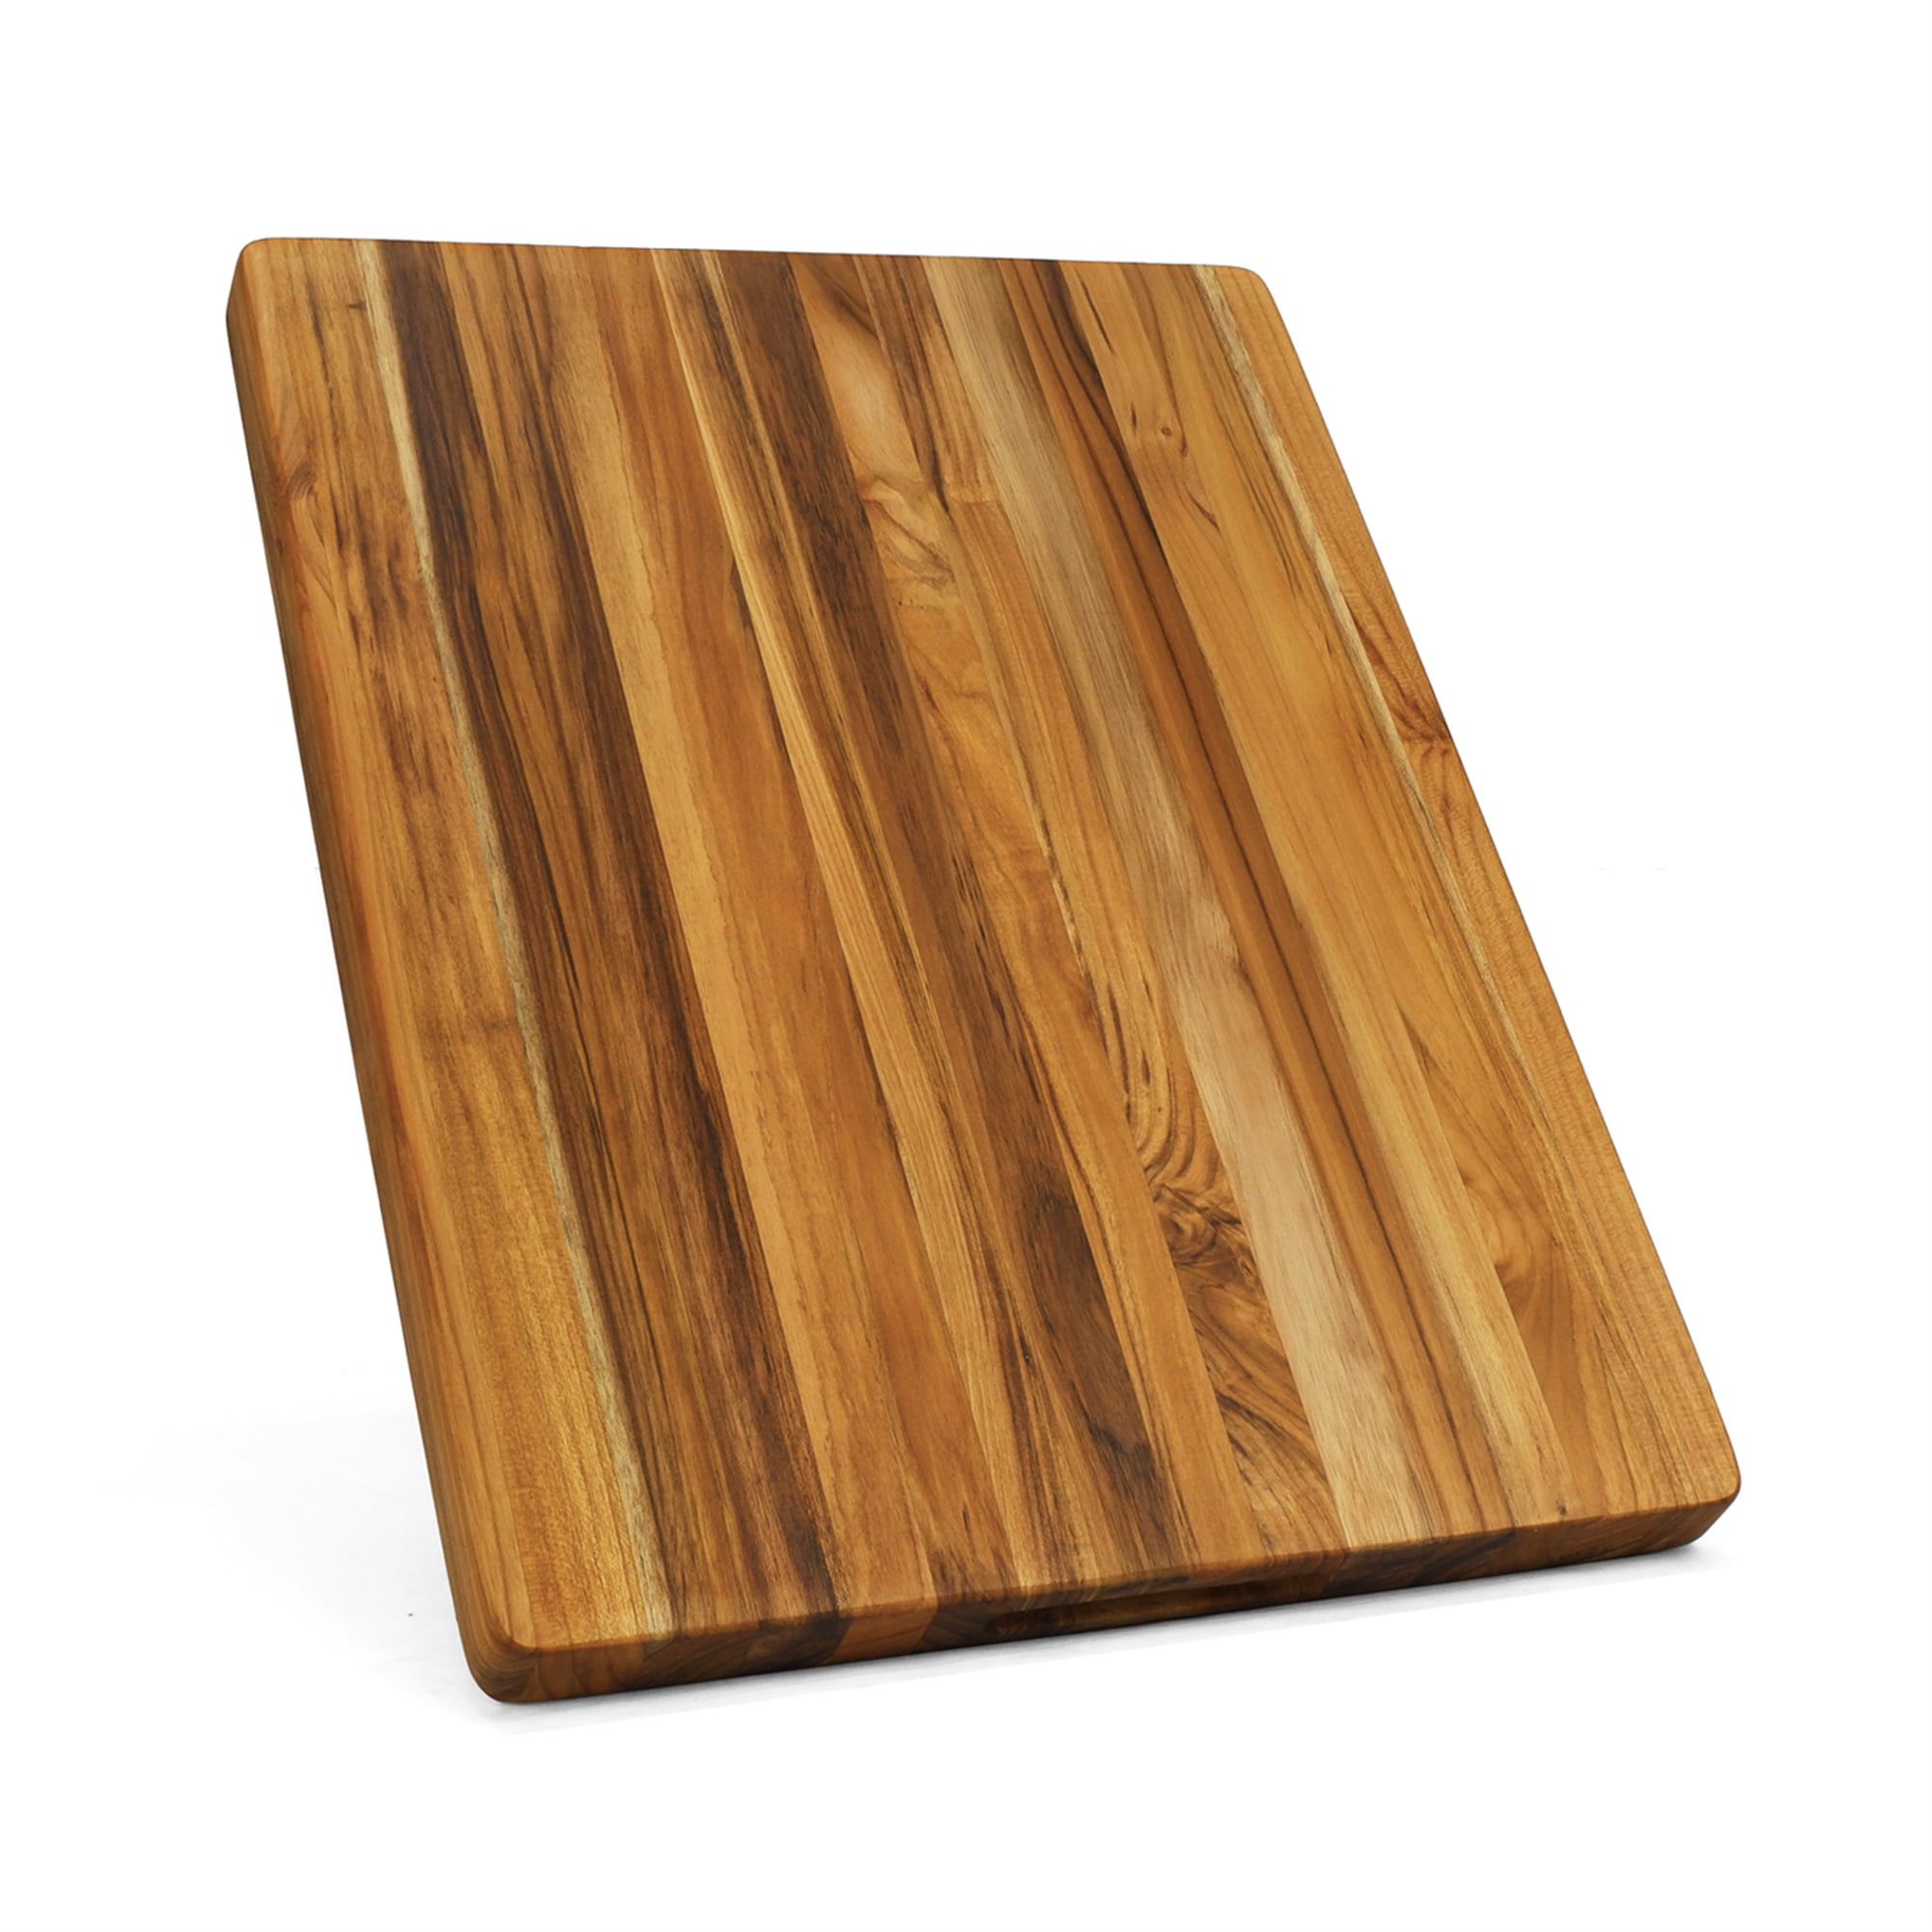 𝐁𝐏𝐀-𝐅𝐫𝐞𝐞 Cutting Boards for Kitchen - Plastic Cutting Board Set of  3, Dishwasher Safe Cutting Boards with Juice Grooves, Thick Chopping Boards  for Meat, Veggies, Fruits, Non-Slip (Black) 